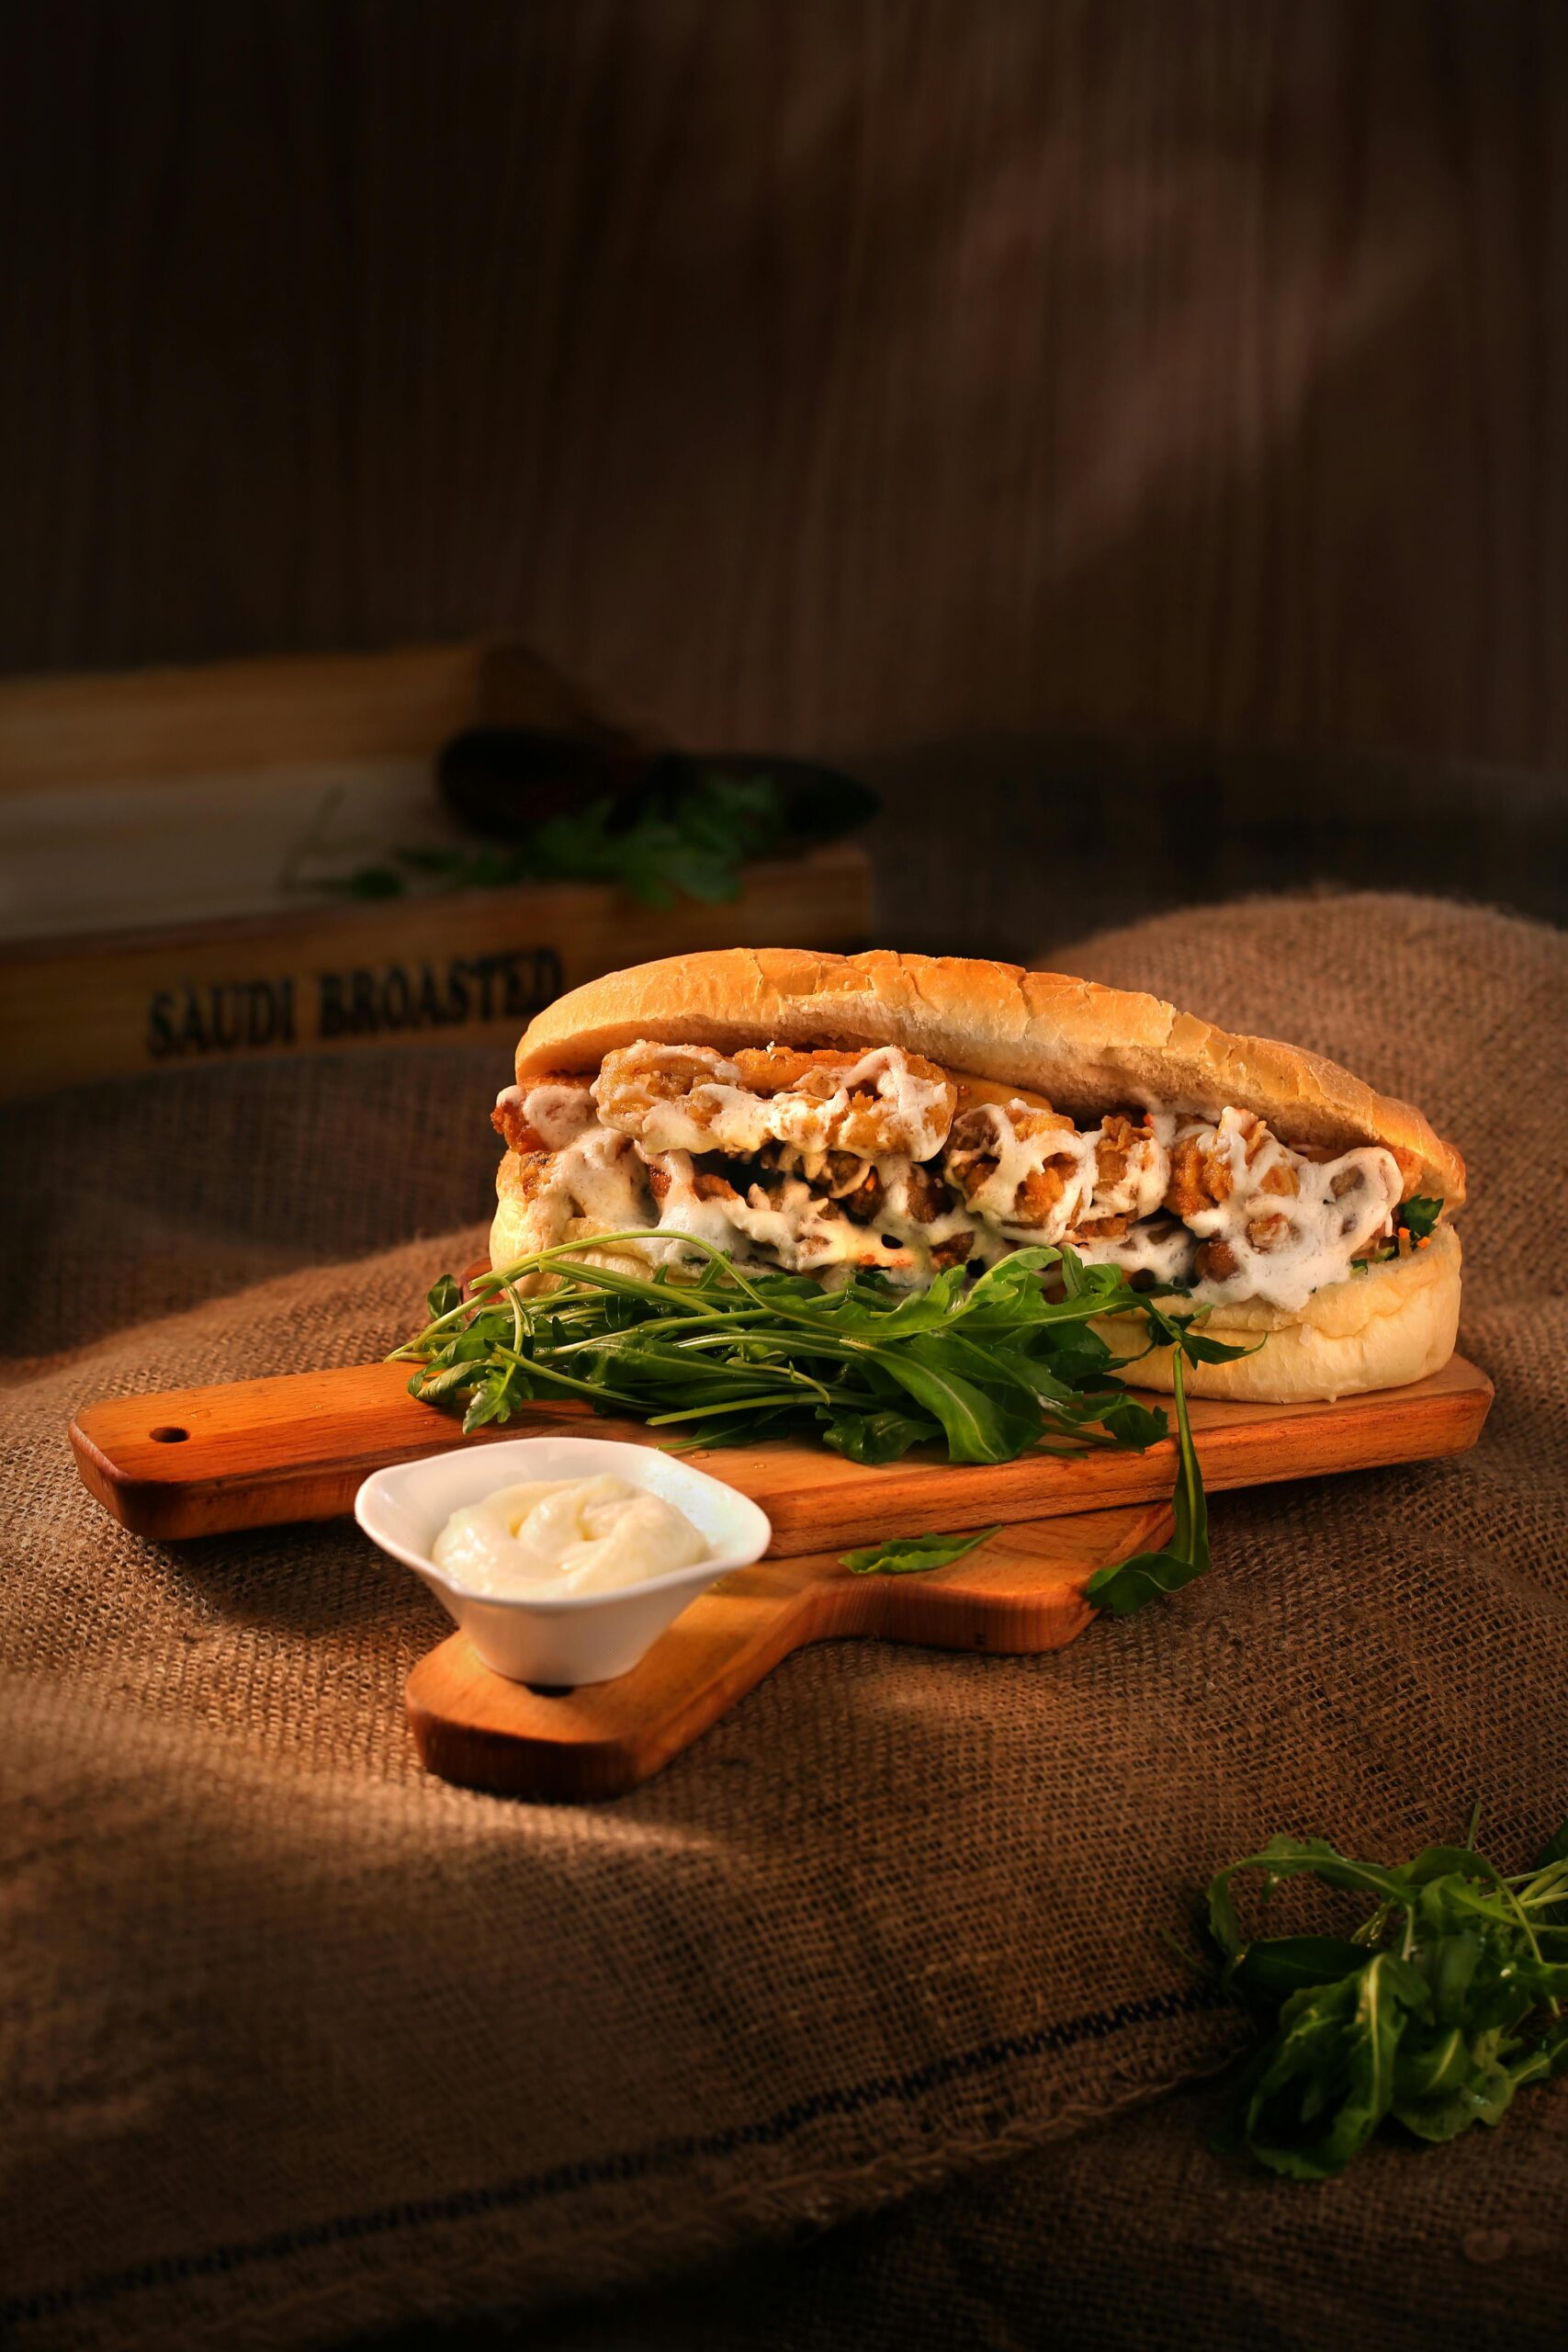 Sub Sandwich Franchise How to Incorporate Healthier Menu Options